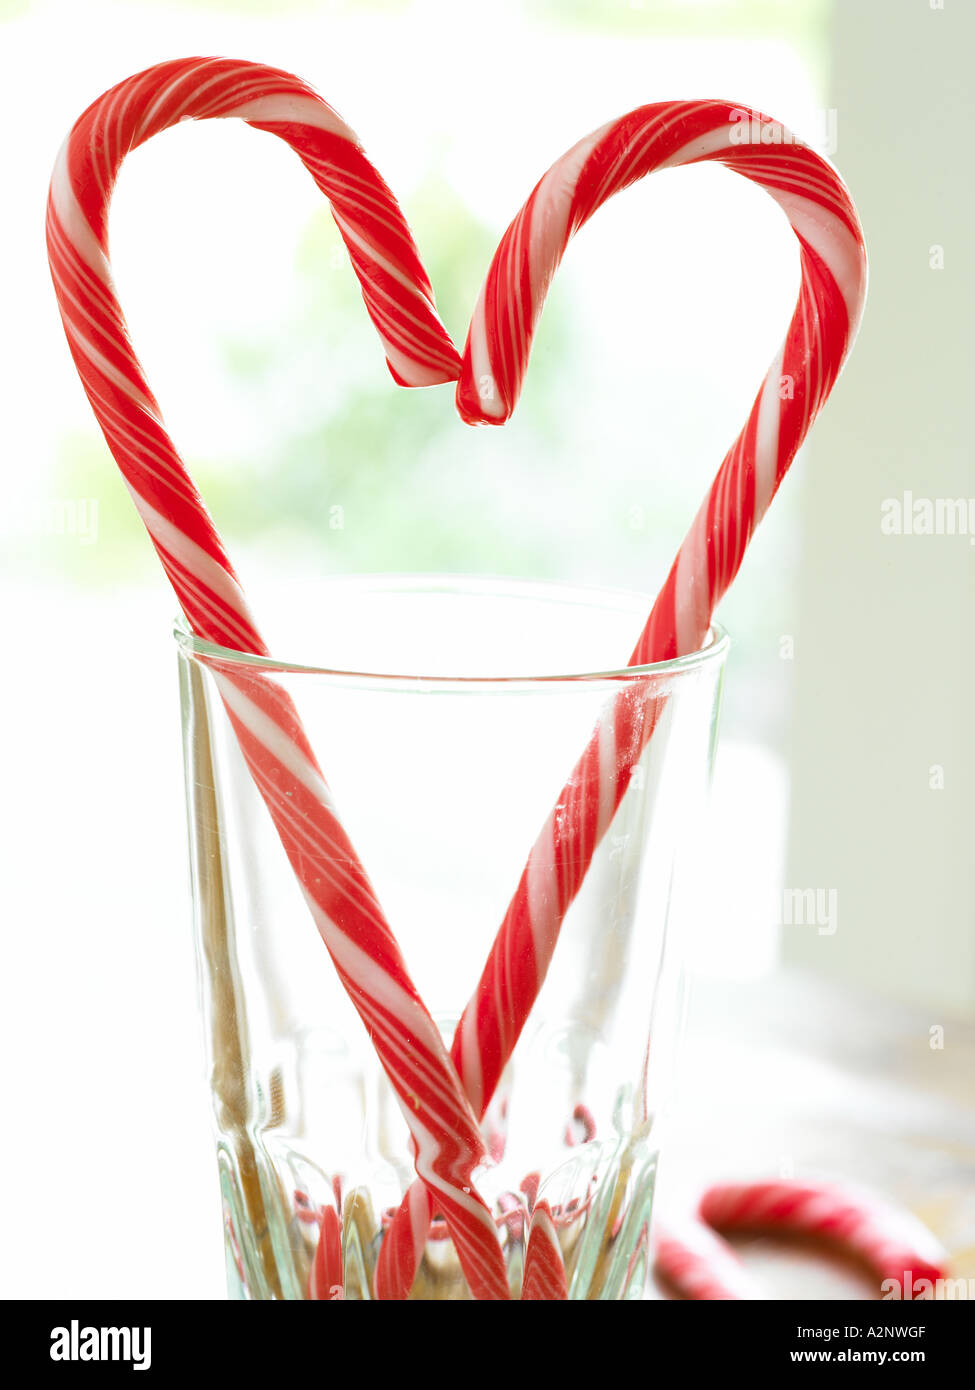 red and white candy cane sticks making a symbol of a hart shape in a glass tumbler backlight by window light Stock Photo